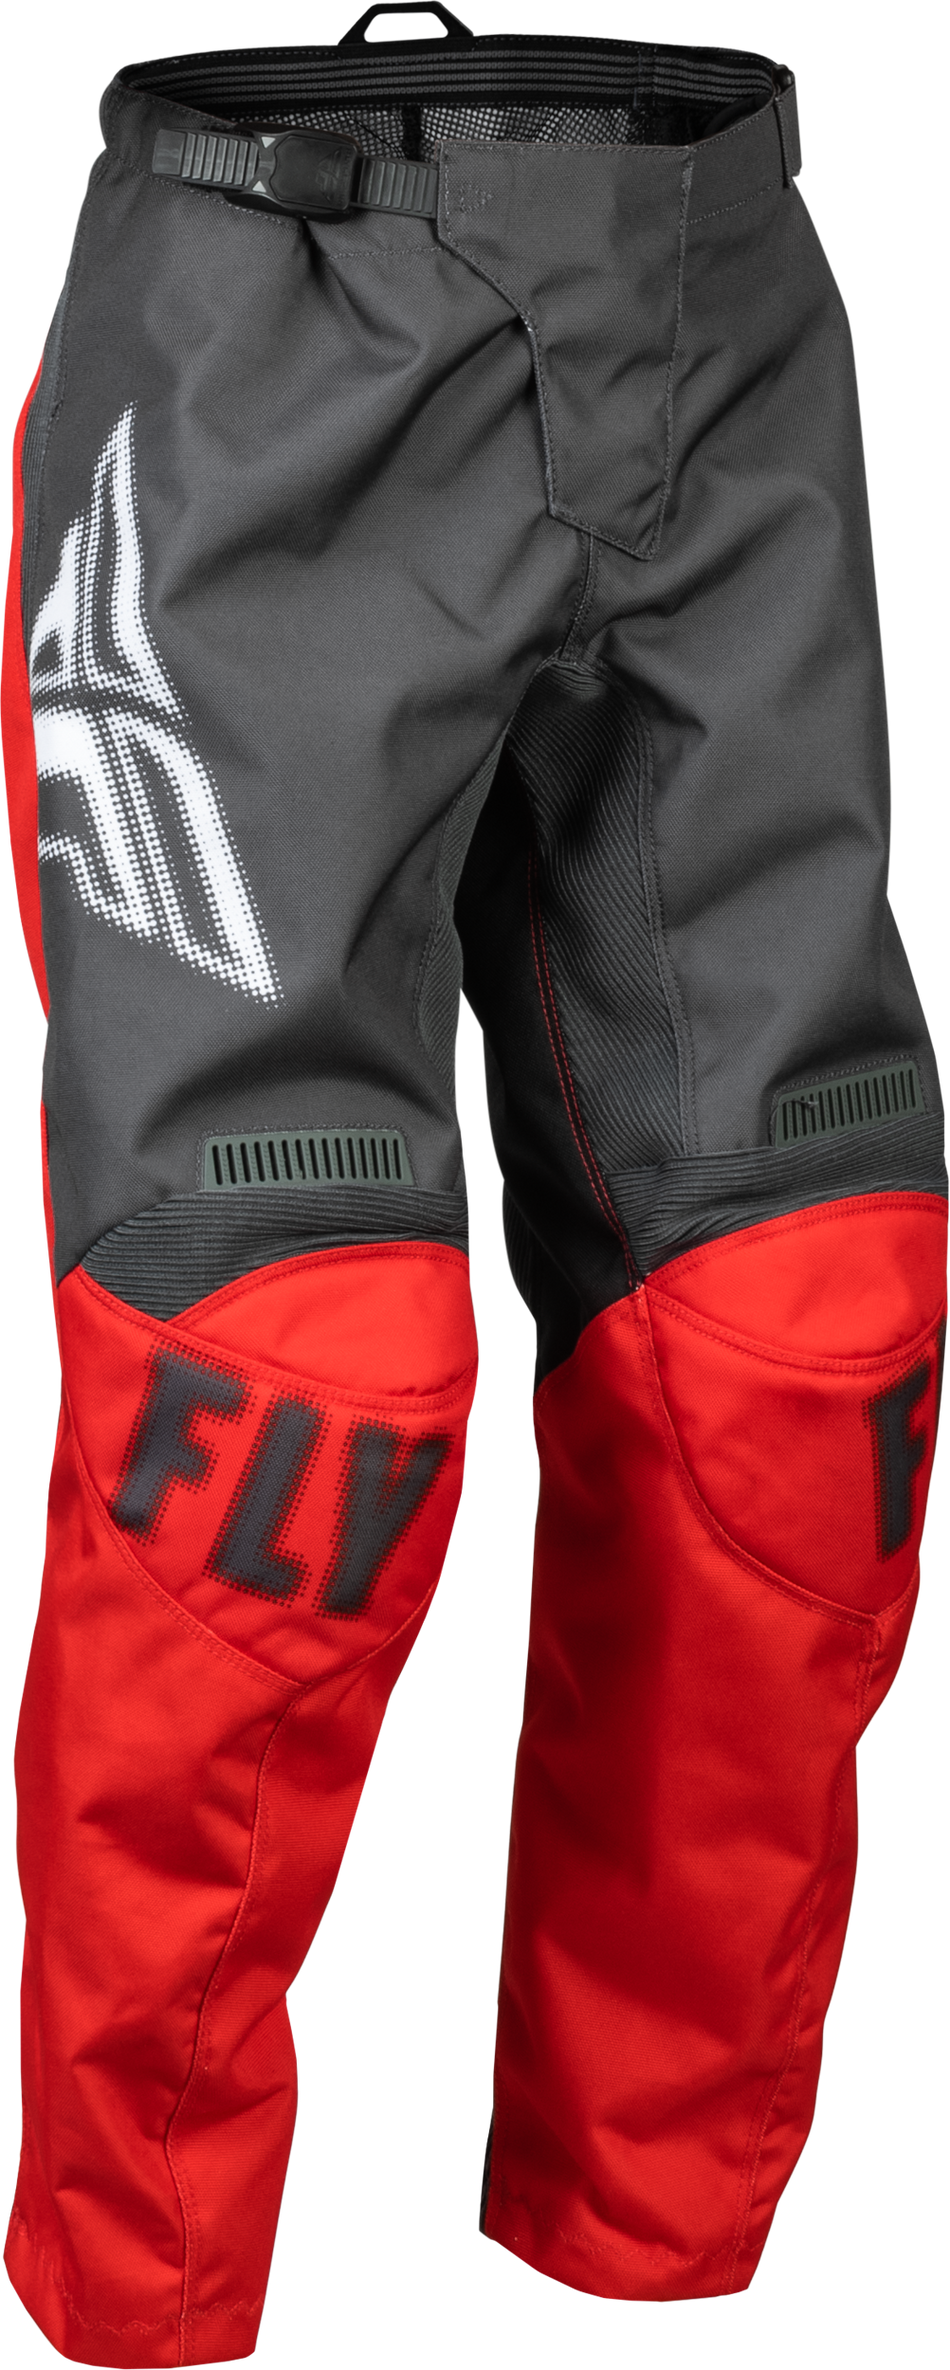 FLY RACING Youth F-16 Pants Grey/Red Sz 26 376-23426